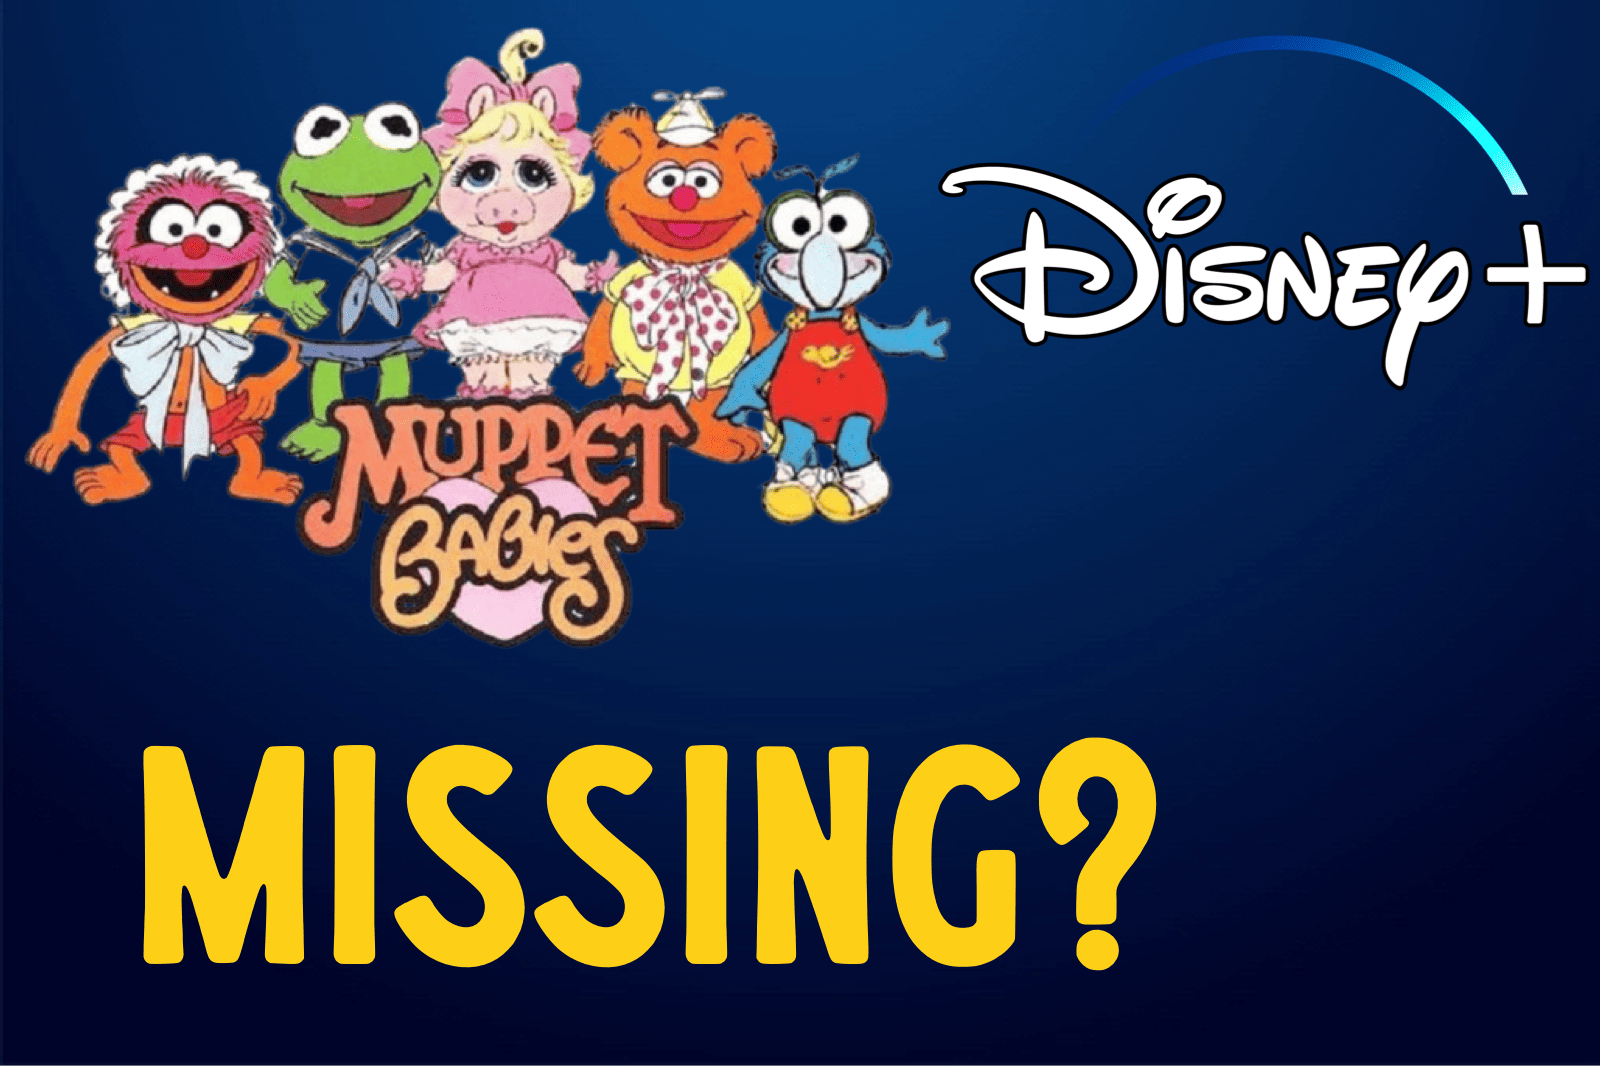 Why isn’t the Muppet Babies on Disney+?